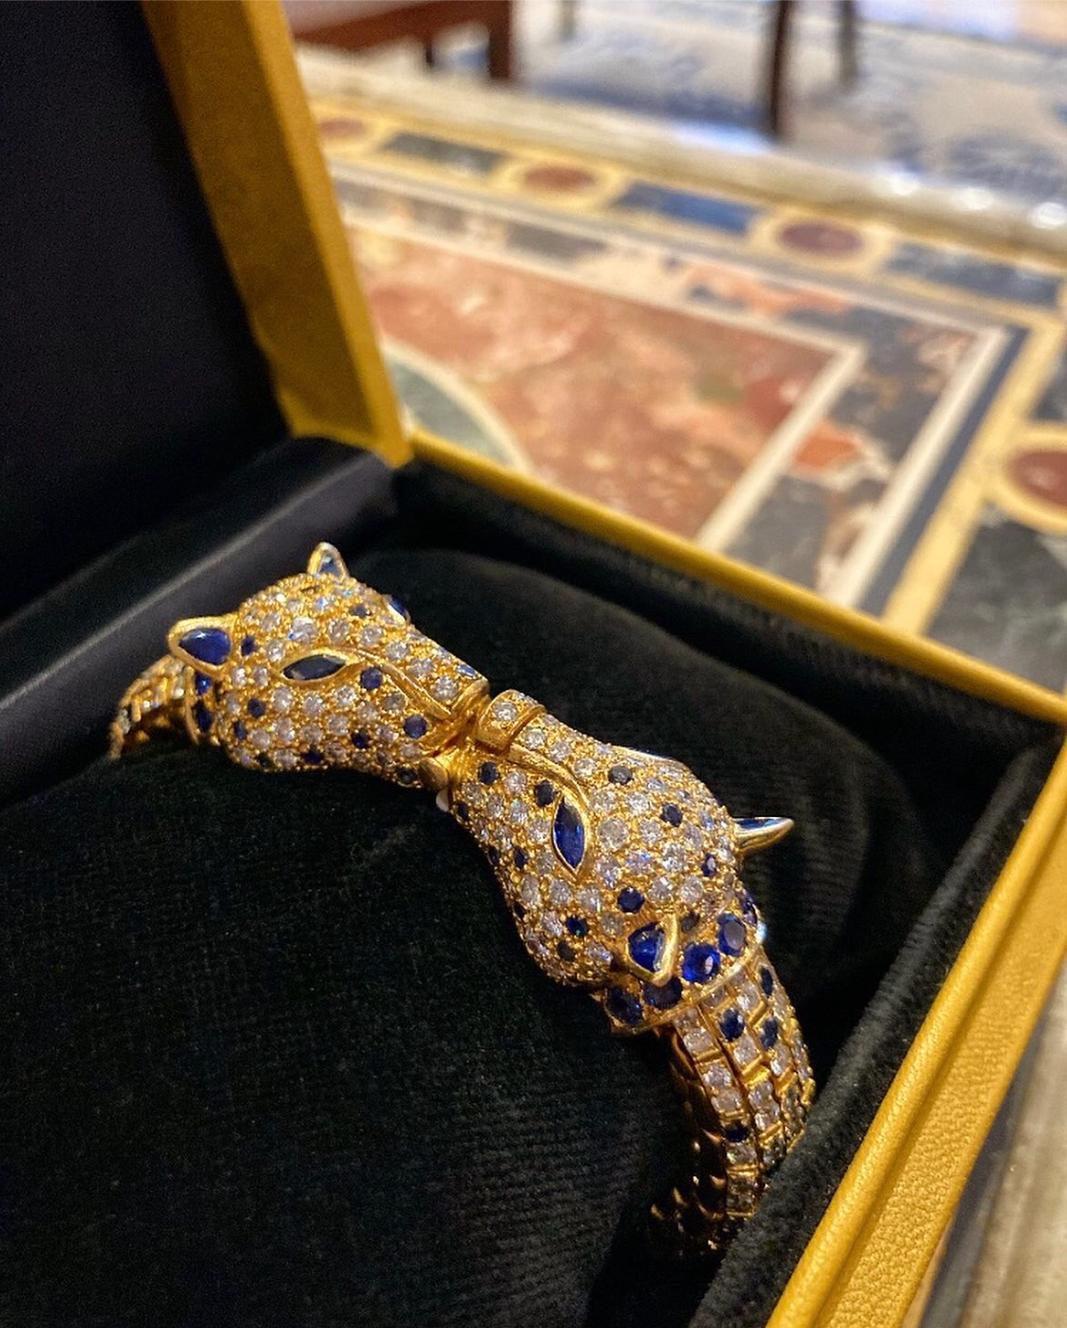 A chic cheetah bracelet in articulated 18 karat yellow gold with blue sapphires and diamonds. Made in France, circa 1970.